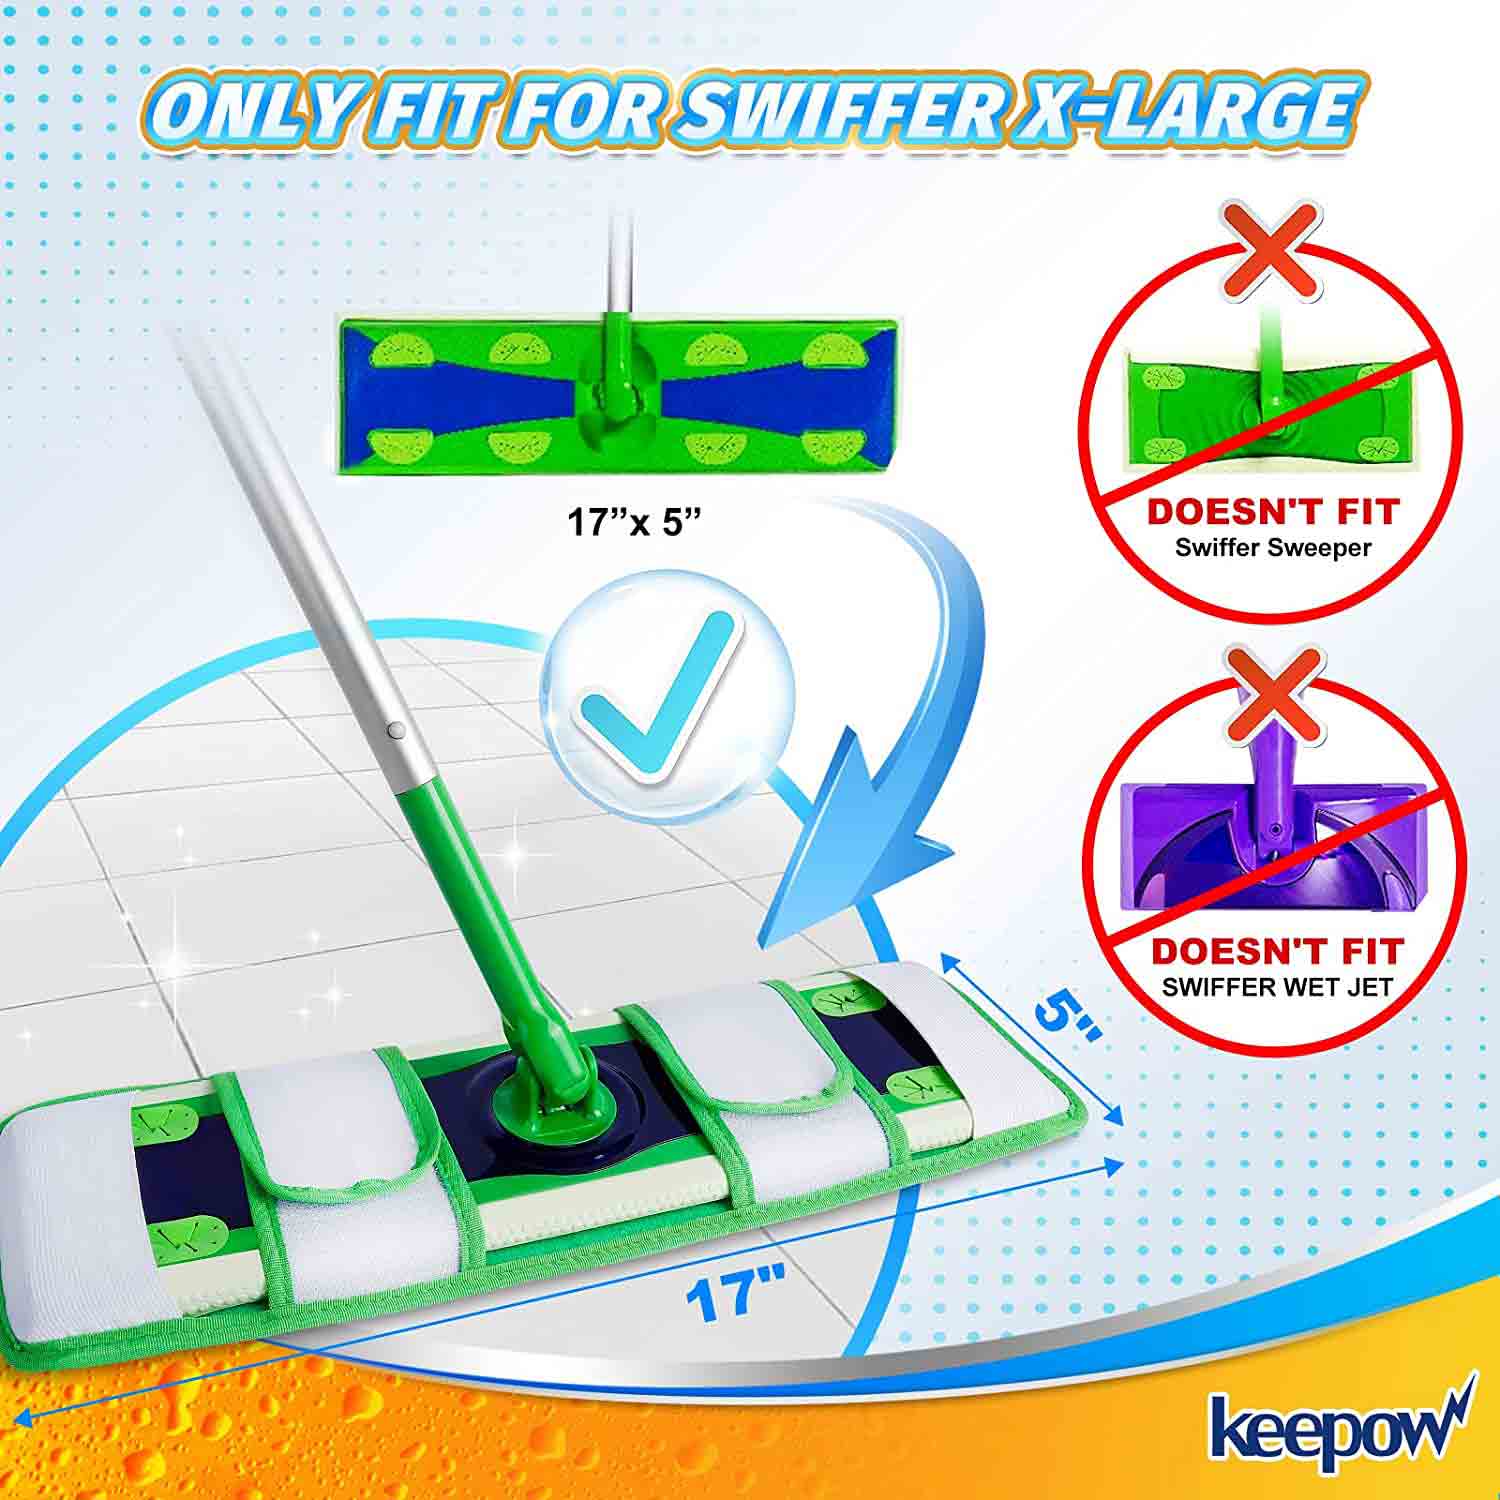 KEEPOW XL Dry Sweeping Cloths for Swiffer XL, Dry Refills for Swiffer XL Mop, Reusable Microfiber Mop Pads for Hardwood Floor, 2 Pack